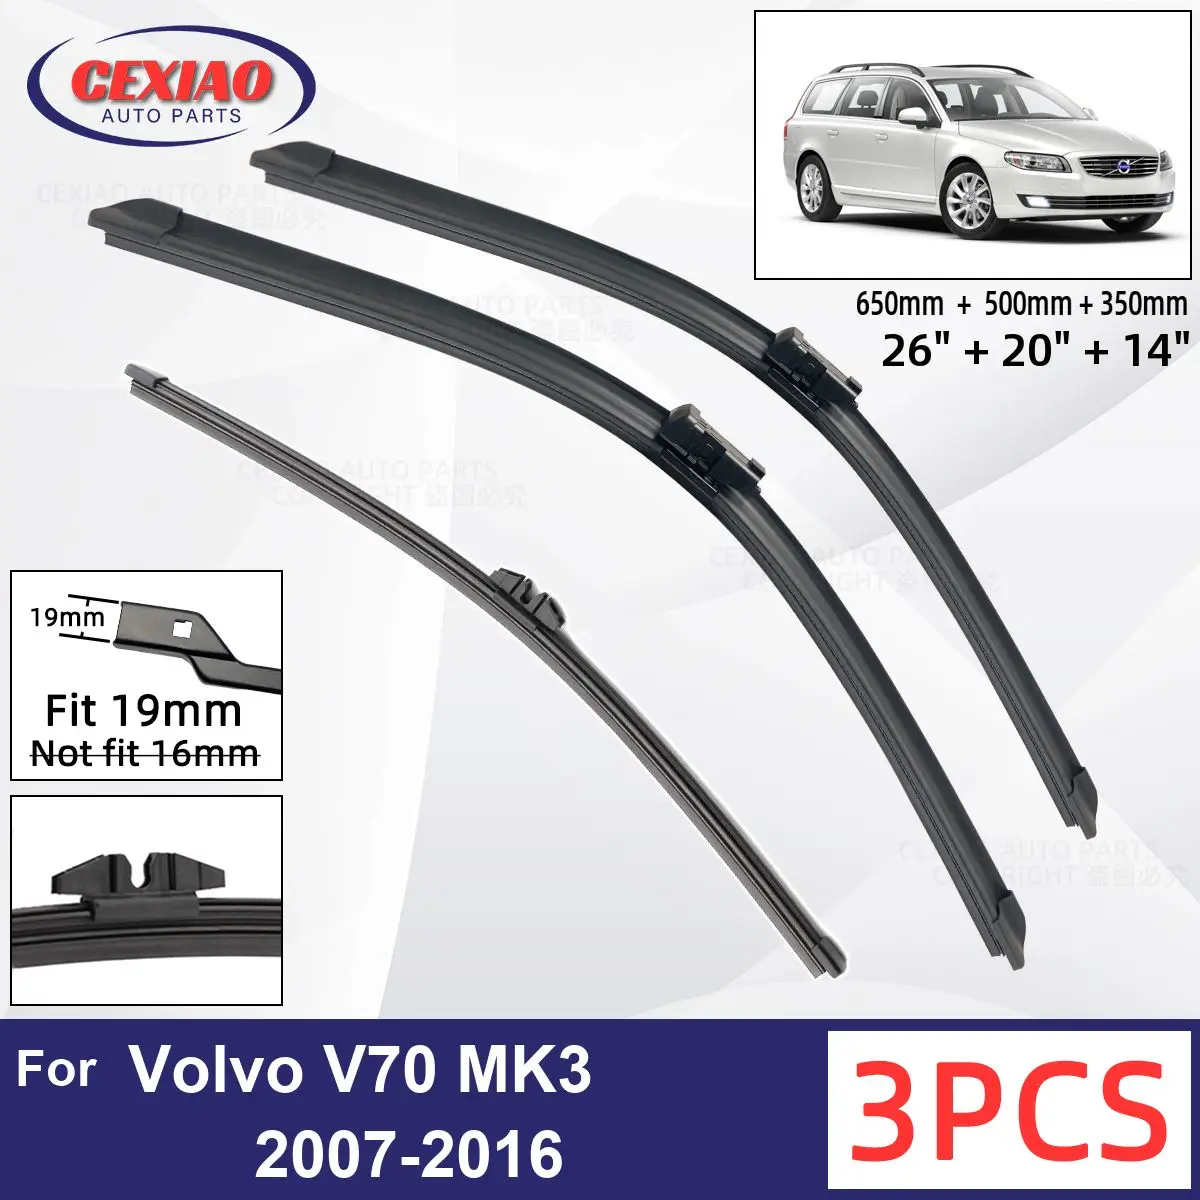 

For Volvo V70 MK3 2007-2016 Car Front Rear Wiper Blades Soft Rubber Windscreen Wipers Auto Windshield 26"+20"+14" 2013 2014 2015